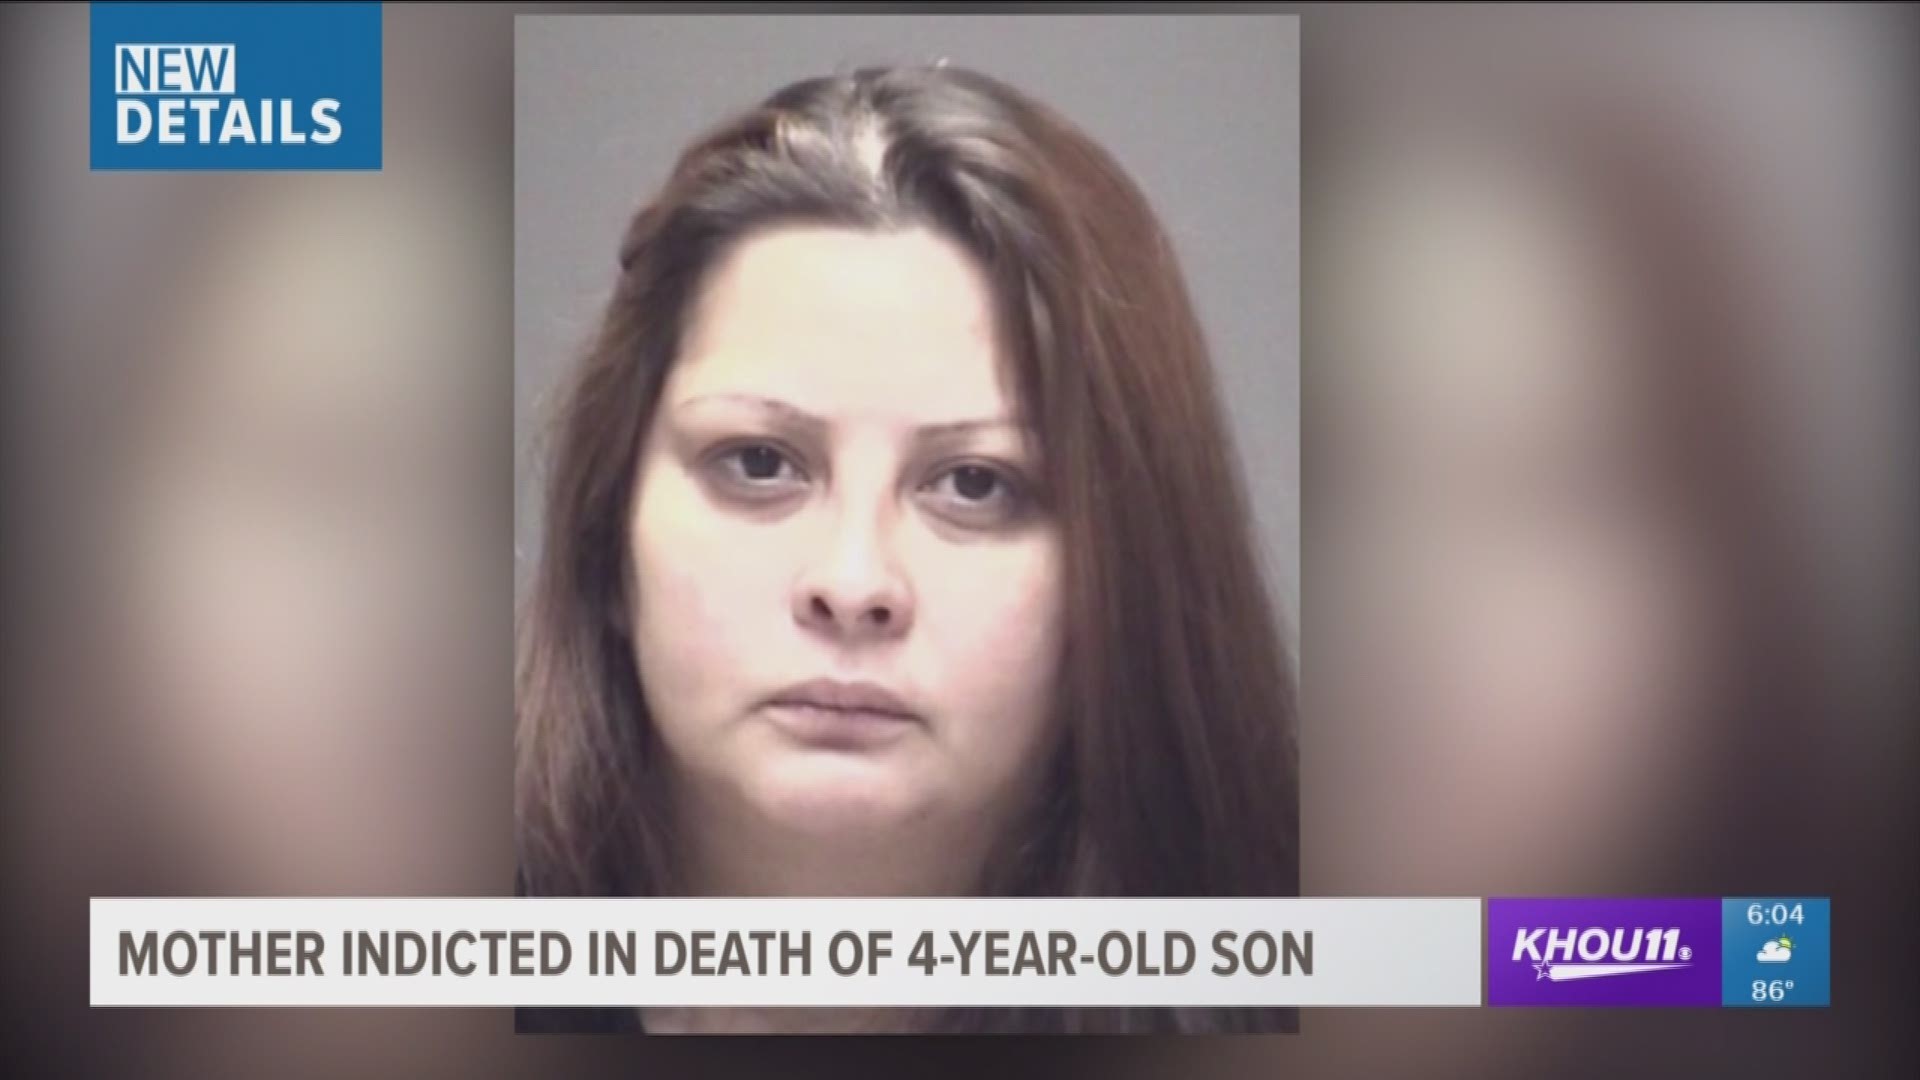 The mother of Jayden Alexander Lopez, the little boy found dead on a Galveston beach last year, has been indicted in relation to his death.